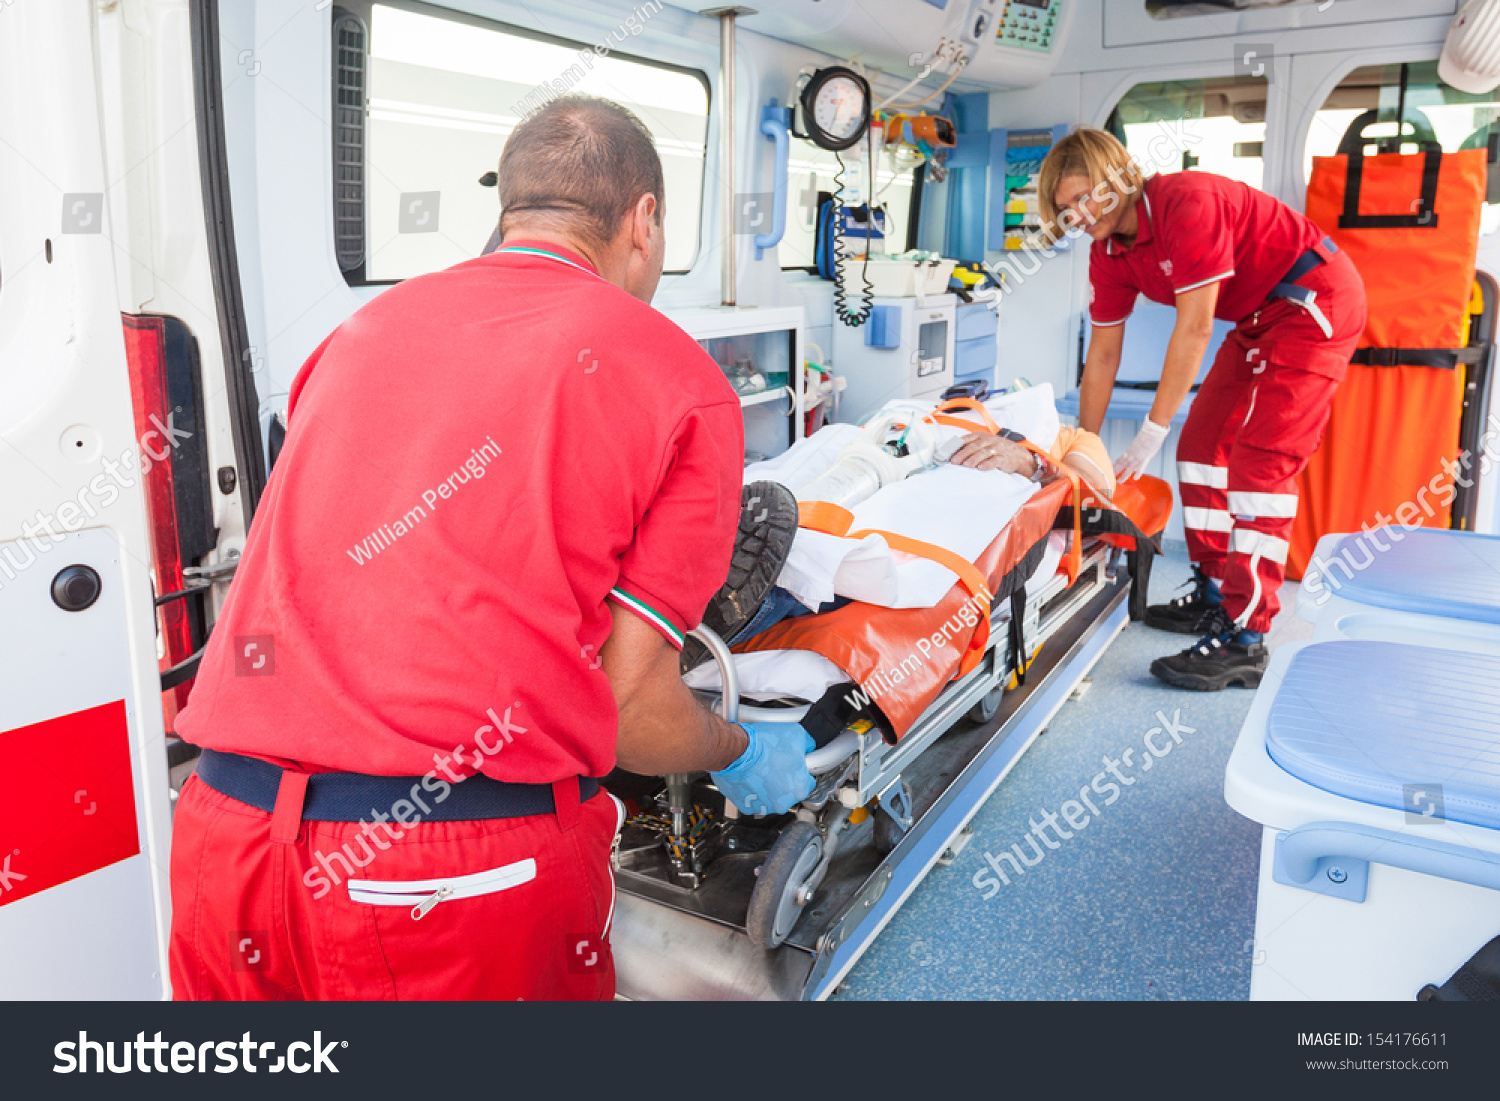 Rescue Team Providing First Aid Stock Photo (Edit Now) 154176611